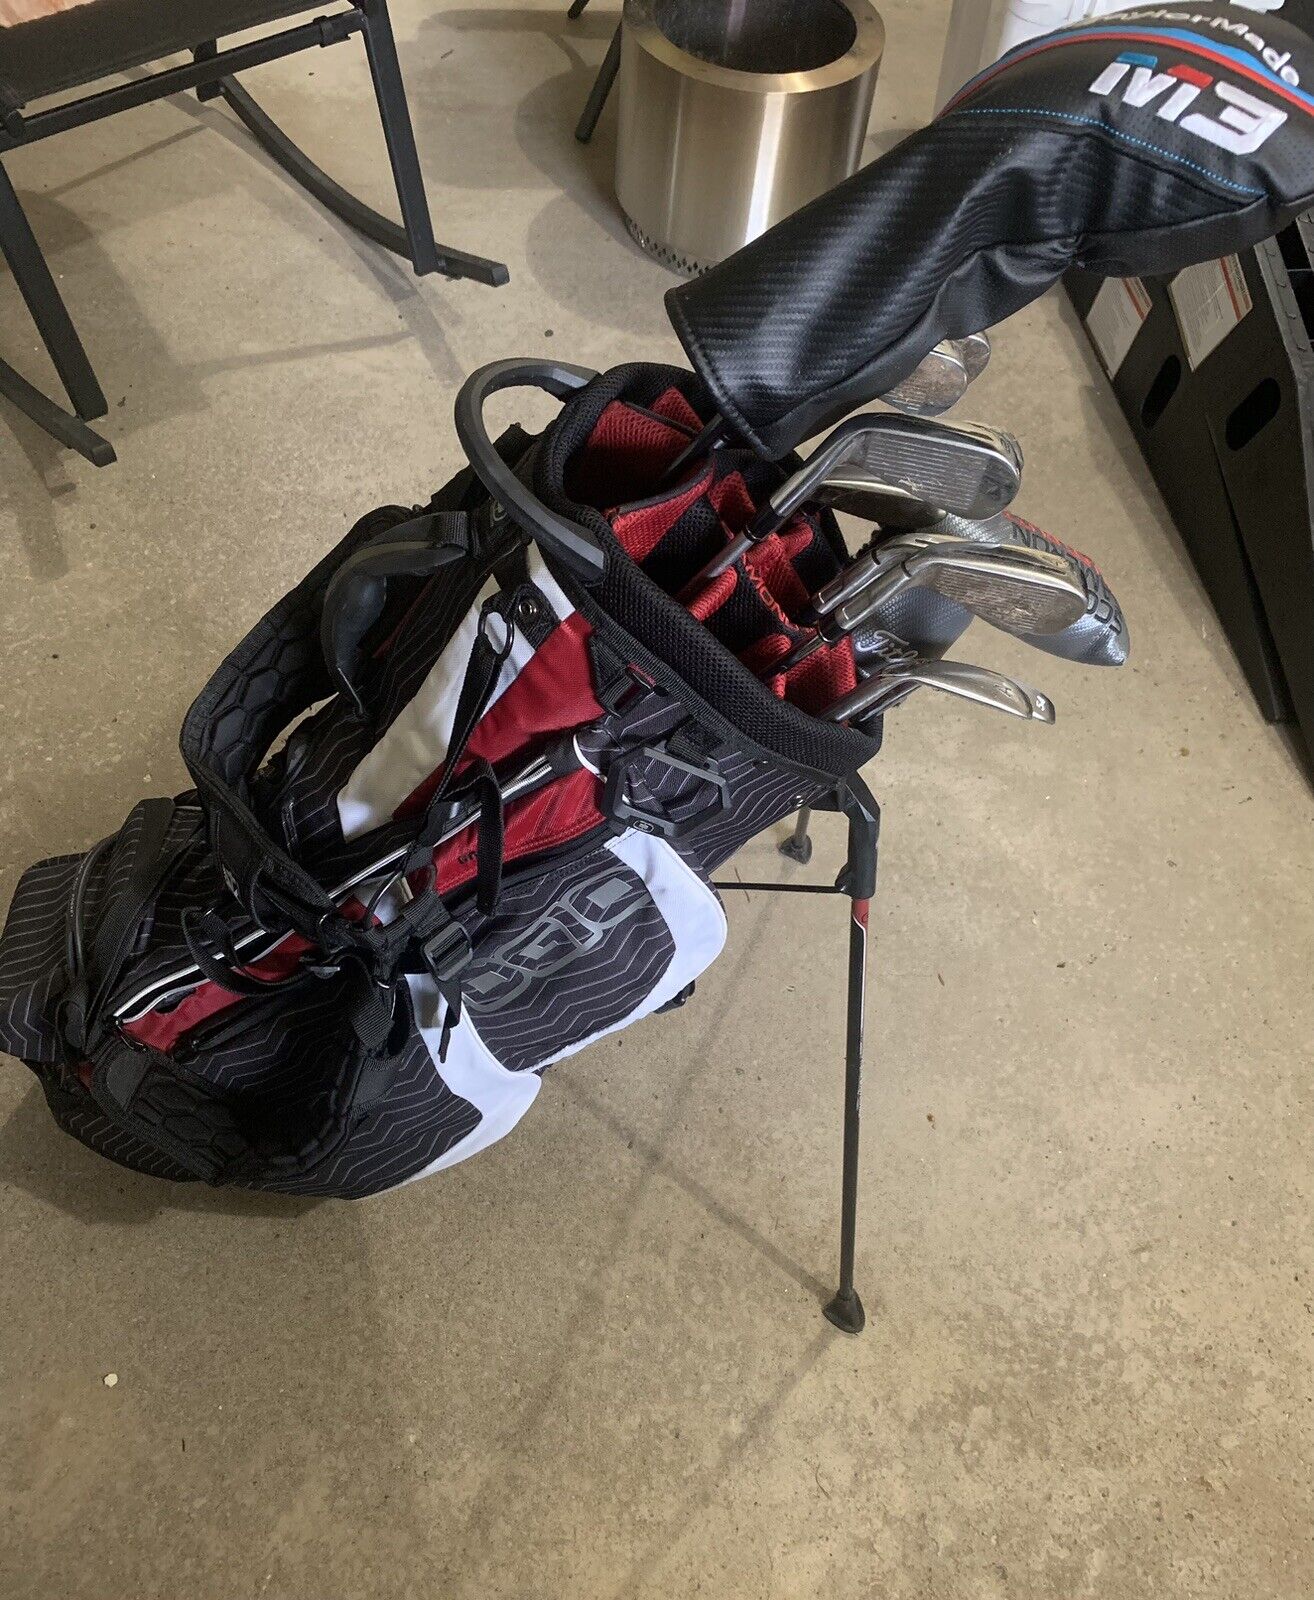 Golf Club Set - TaylorMade Driver, Irons, Wedges. Scotty Cameron Putter